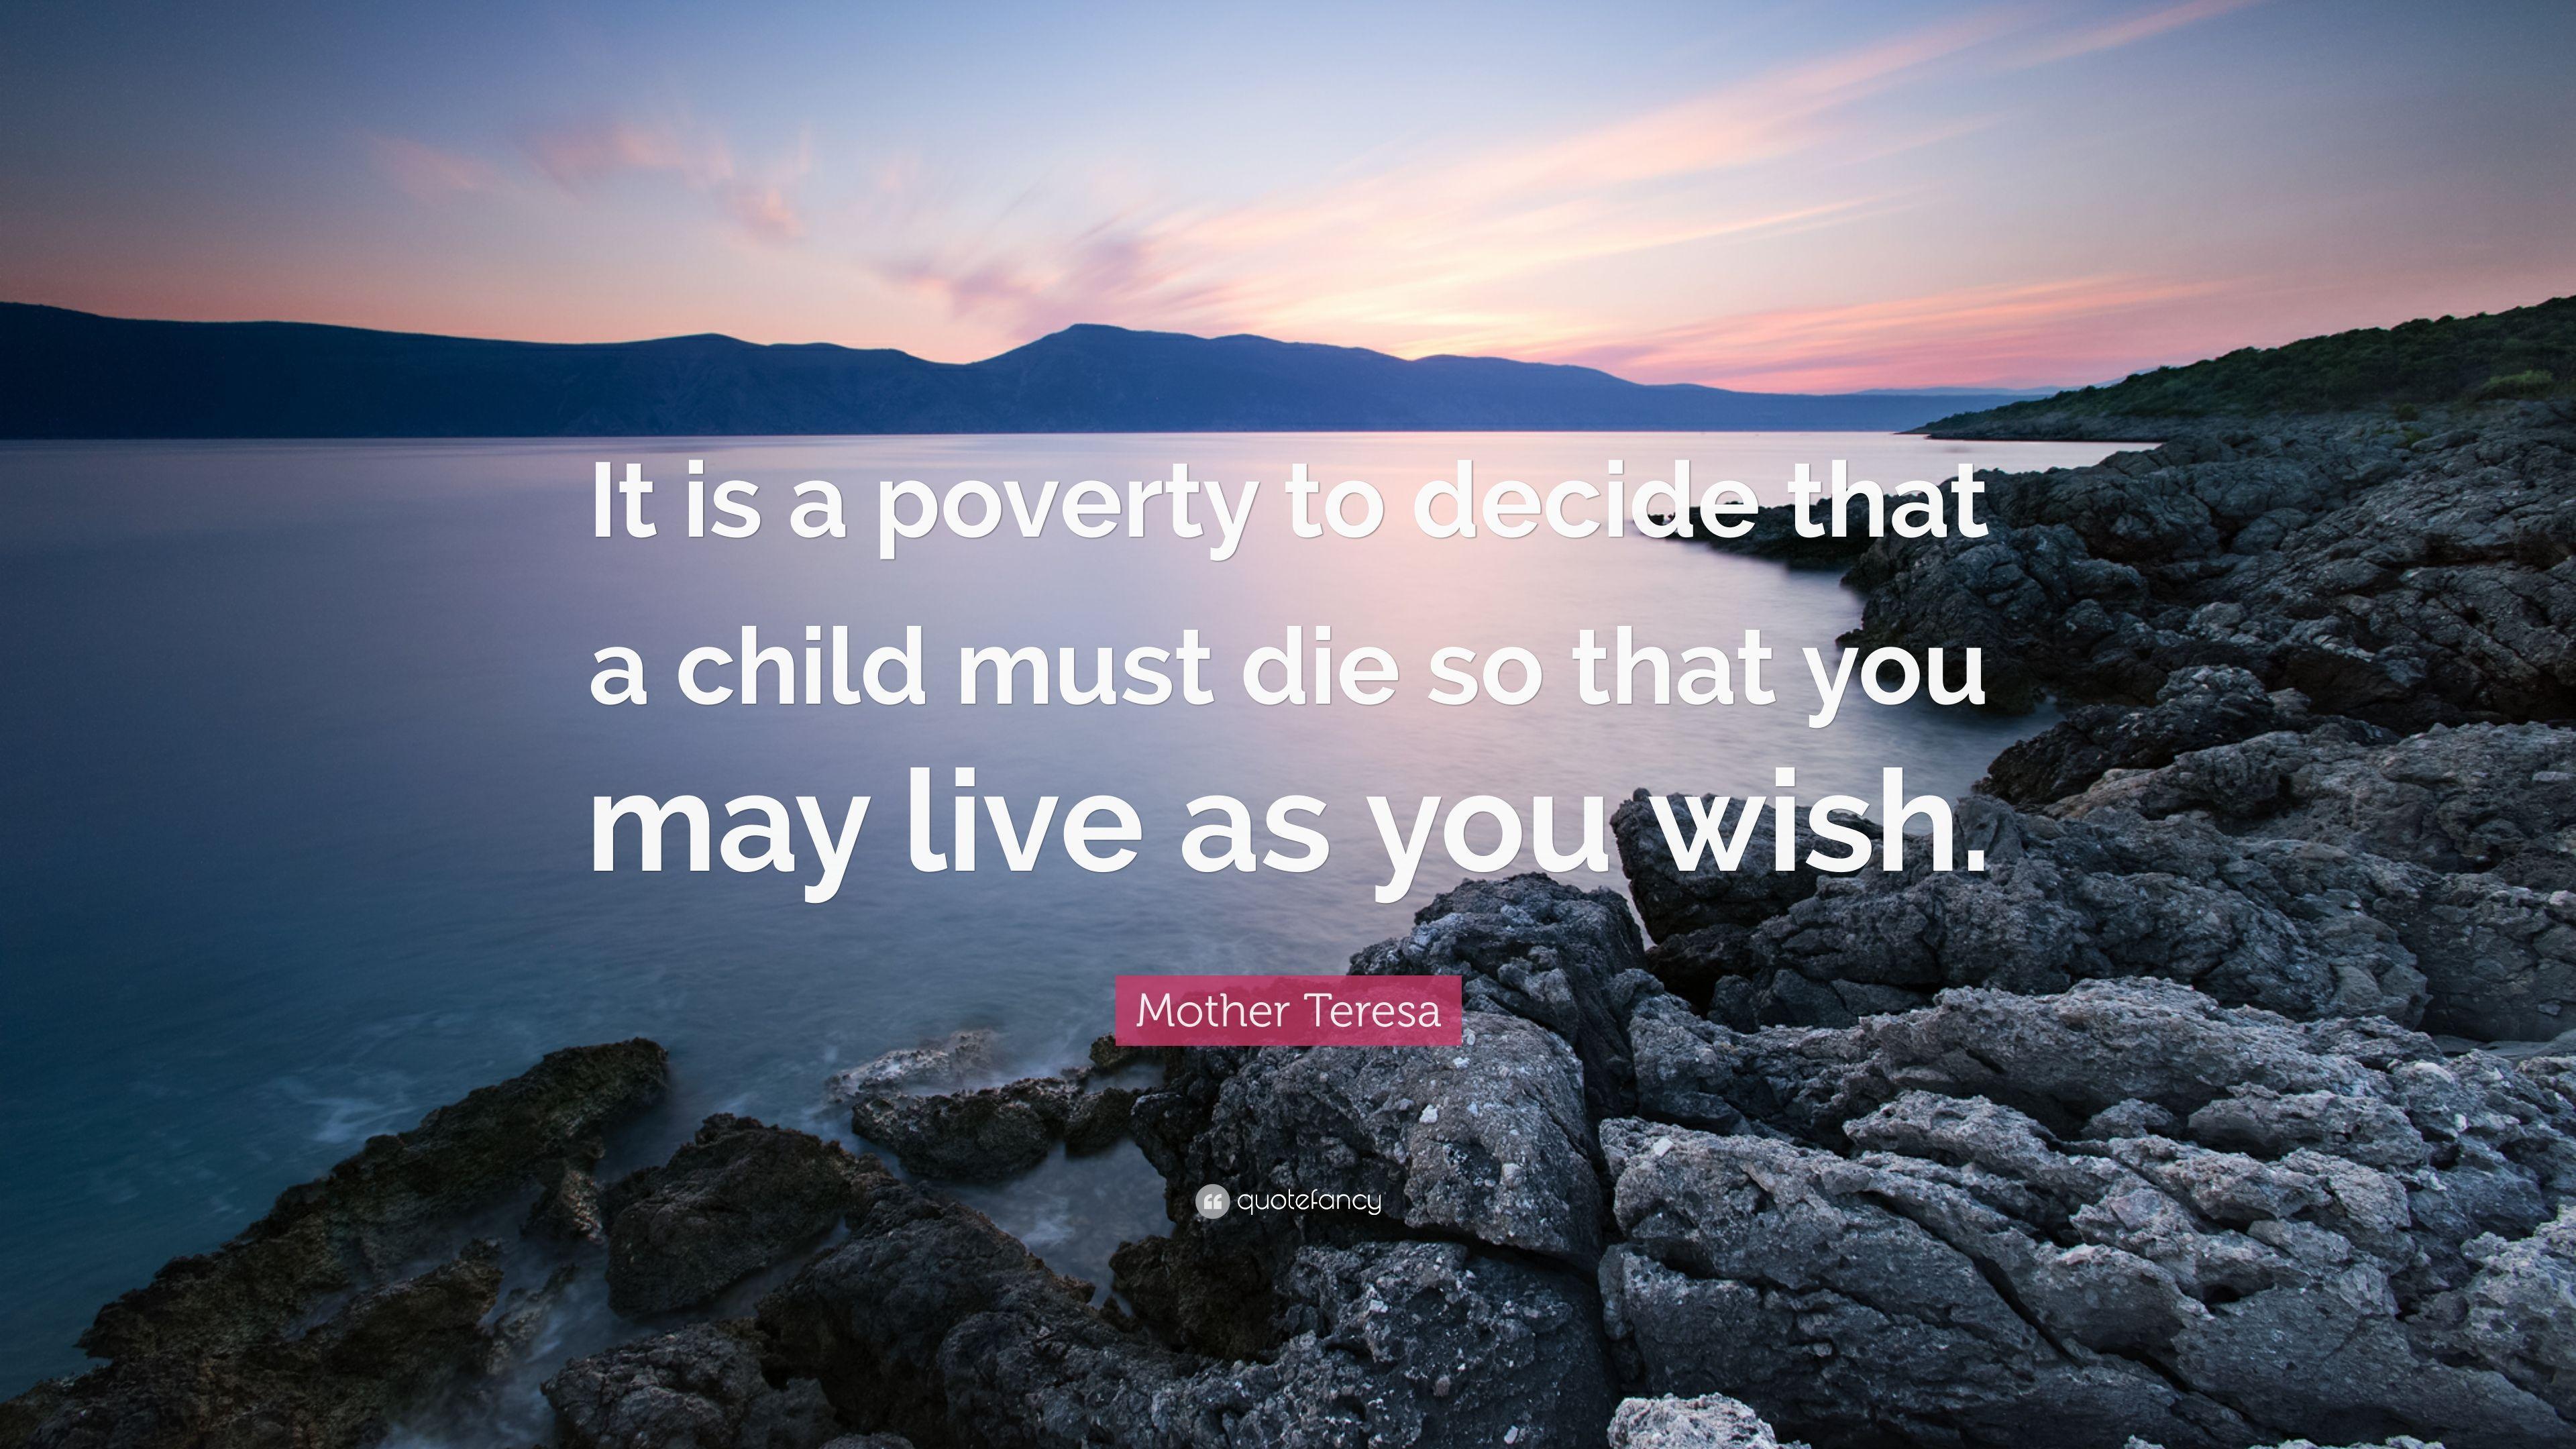 Mother Teresa Quote: “It is a poverty to decide that a child must